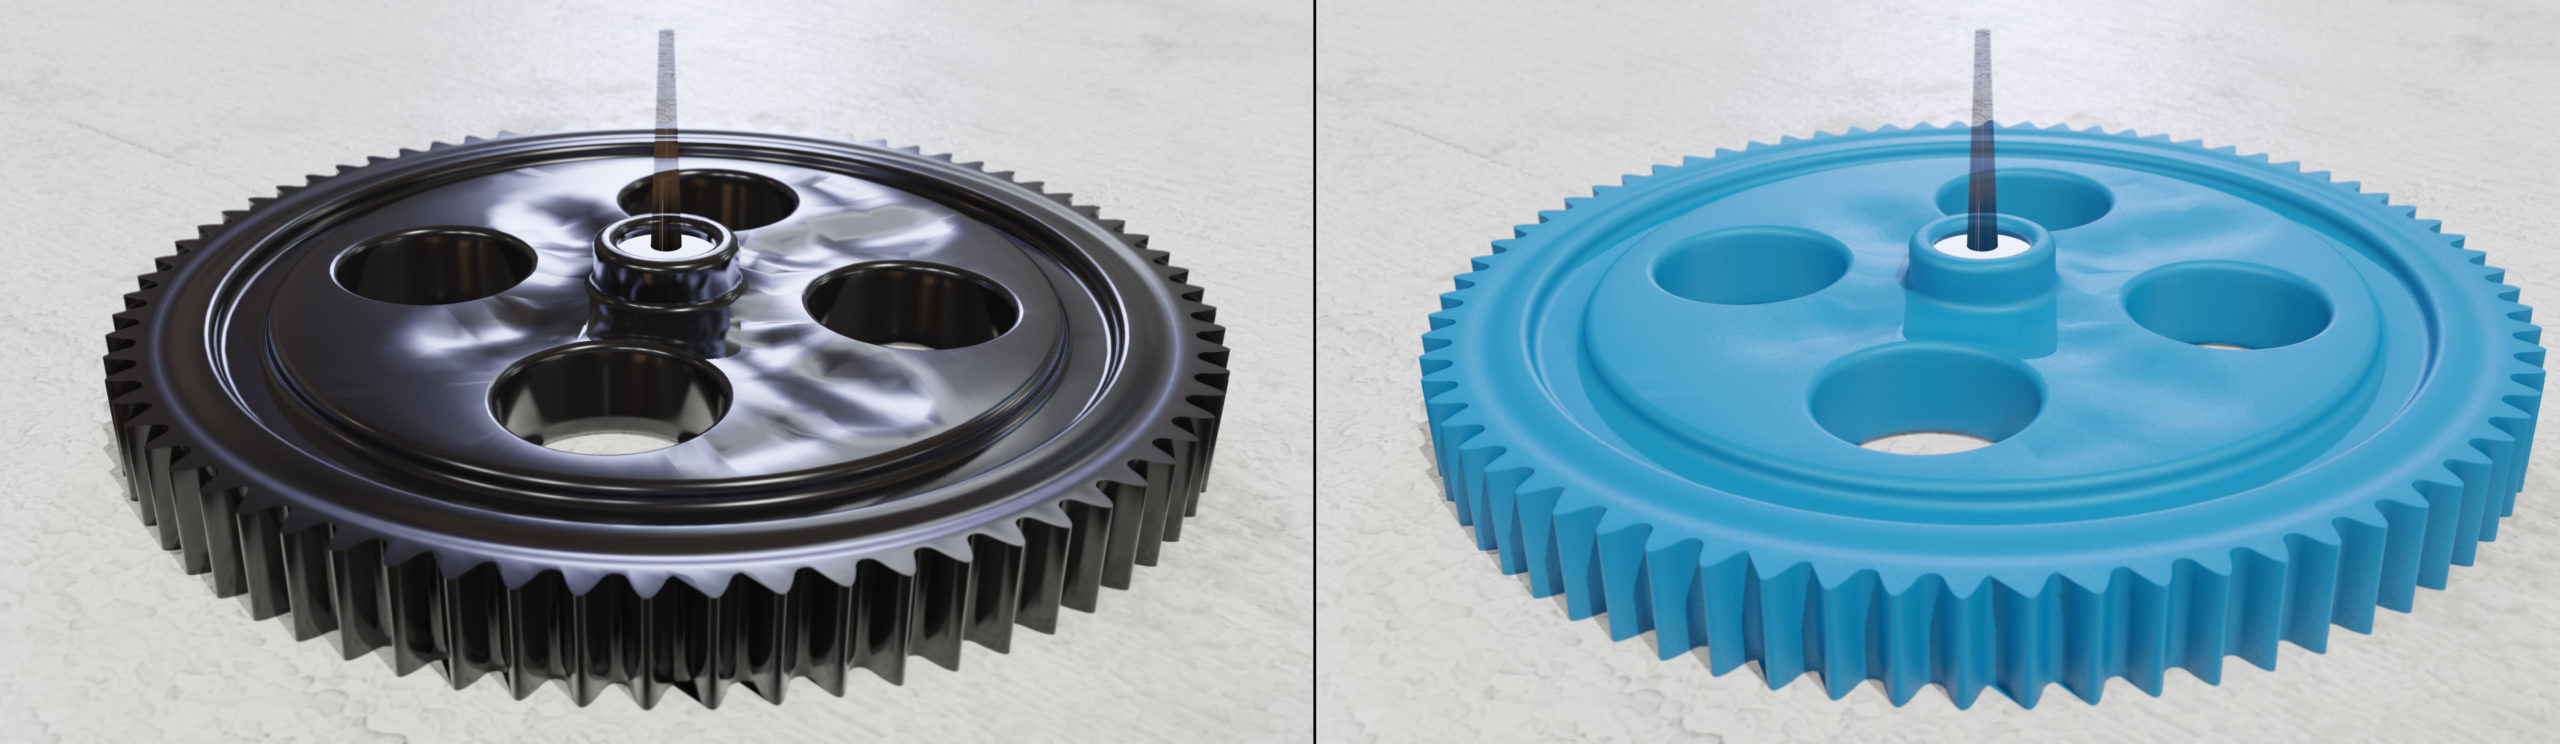 2 examples of sink marks on a gear part